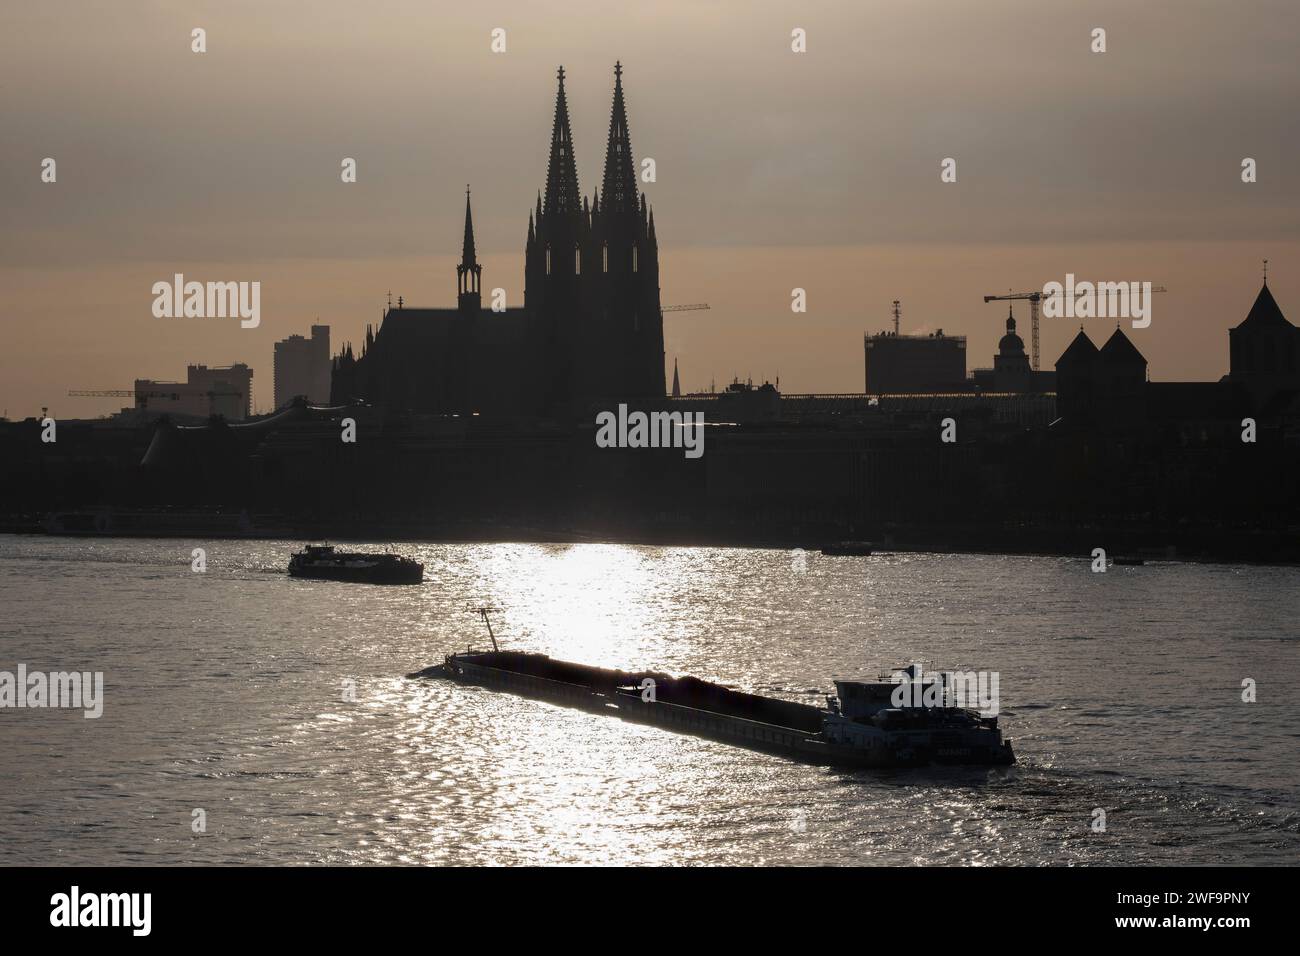 The Rhine with Cologne Cathedral in the background and two barges in the foreground Stock Photo